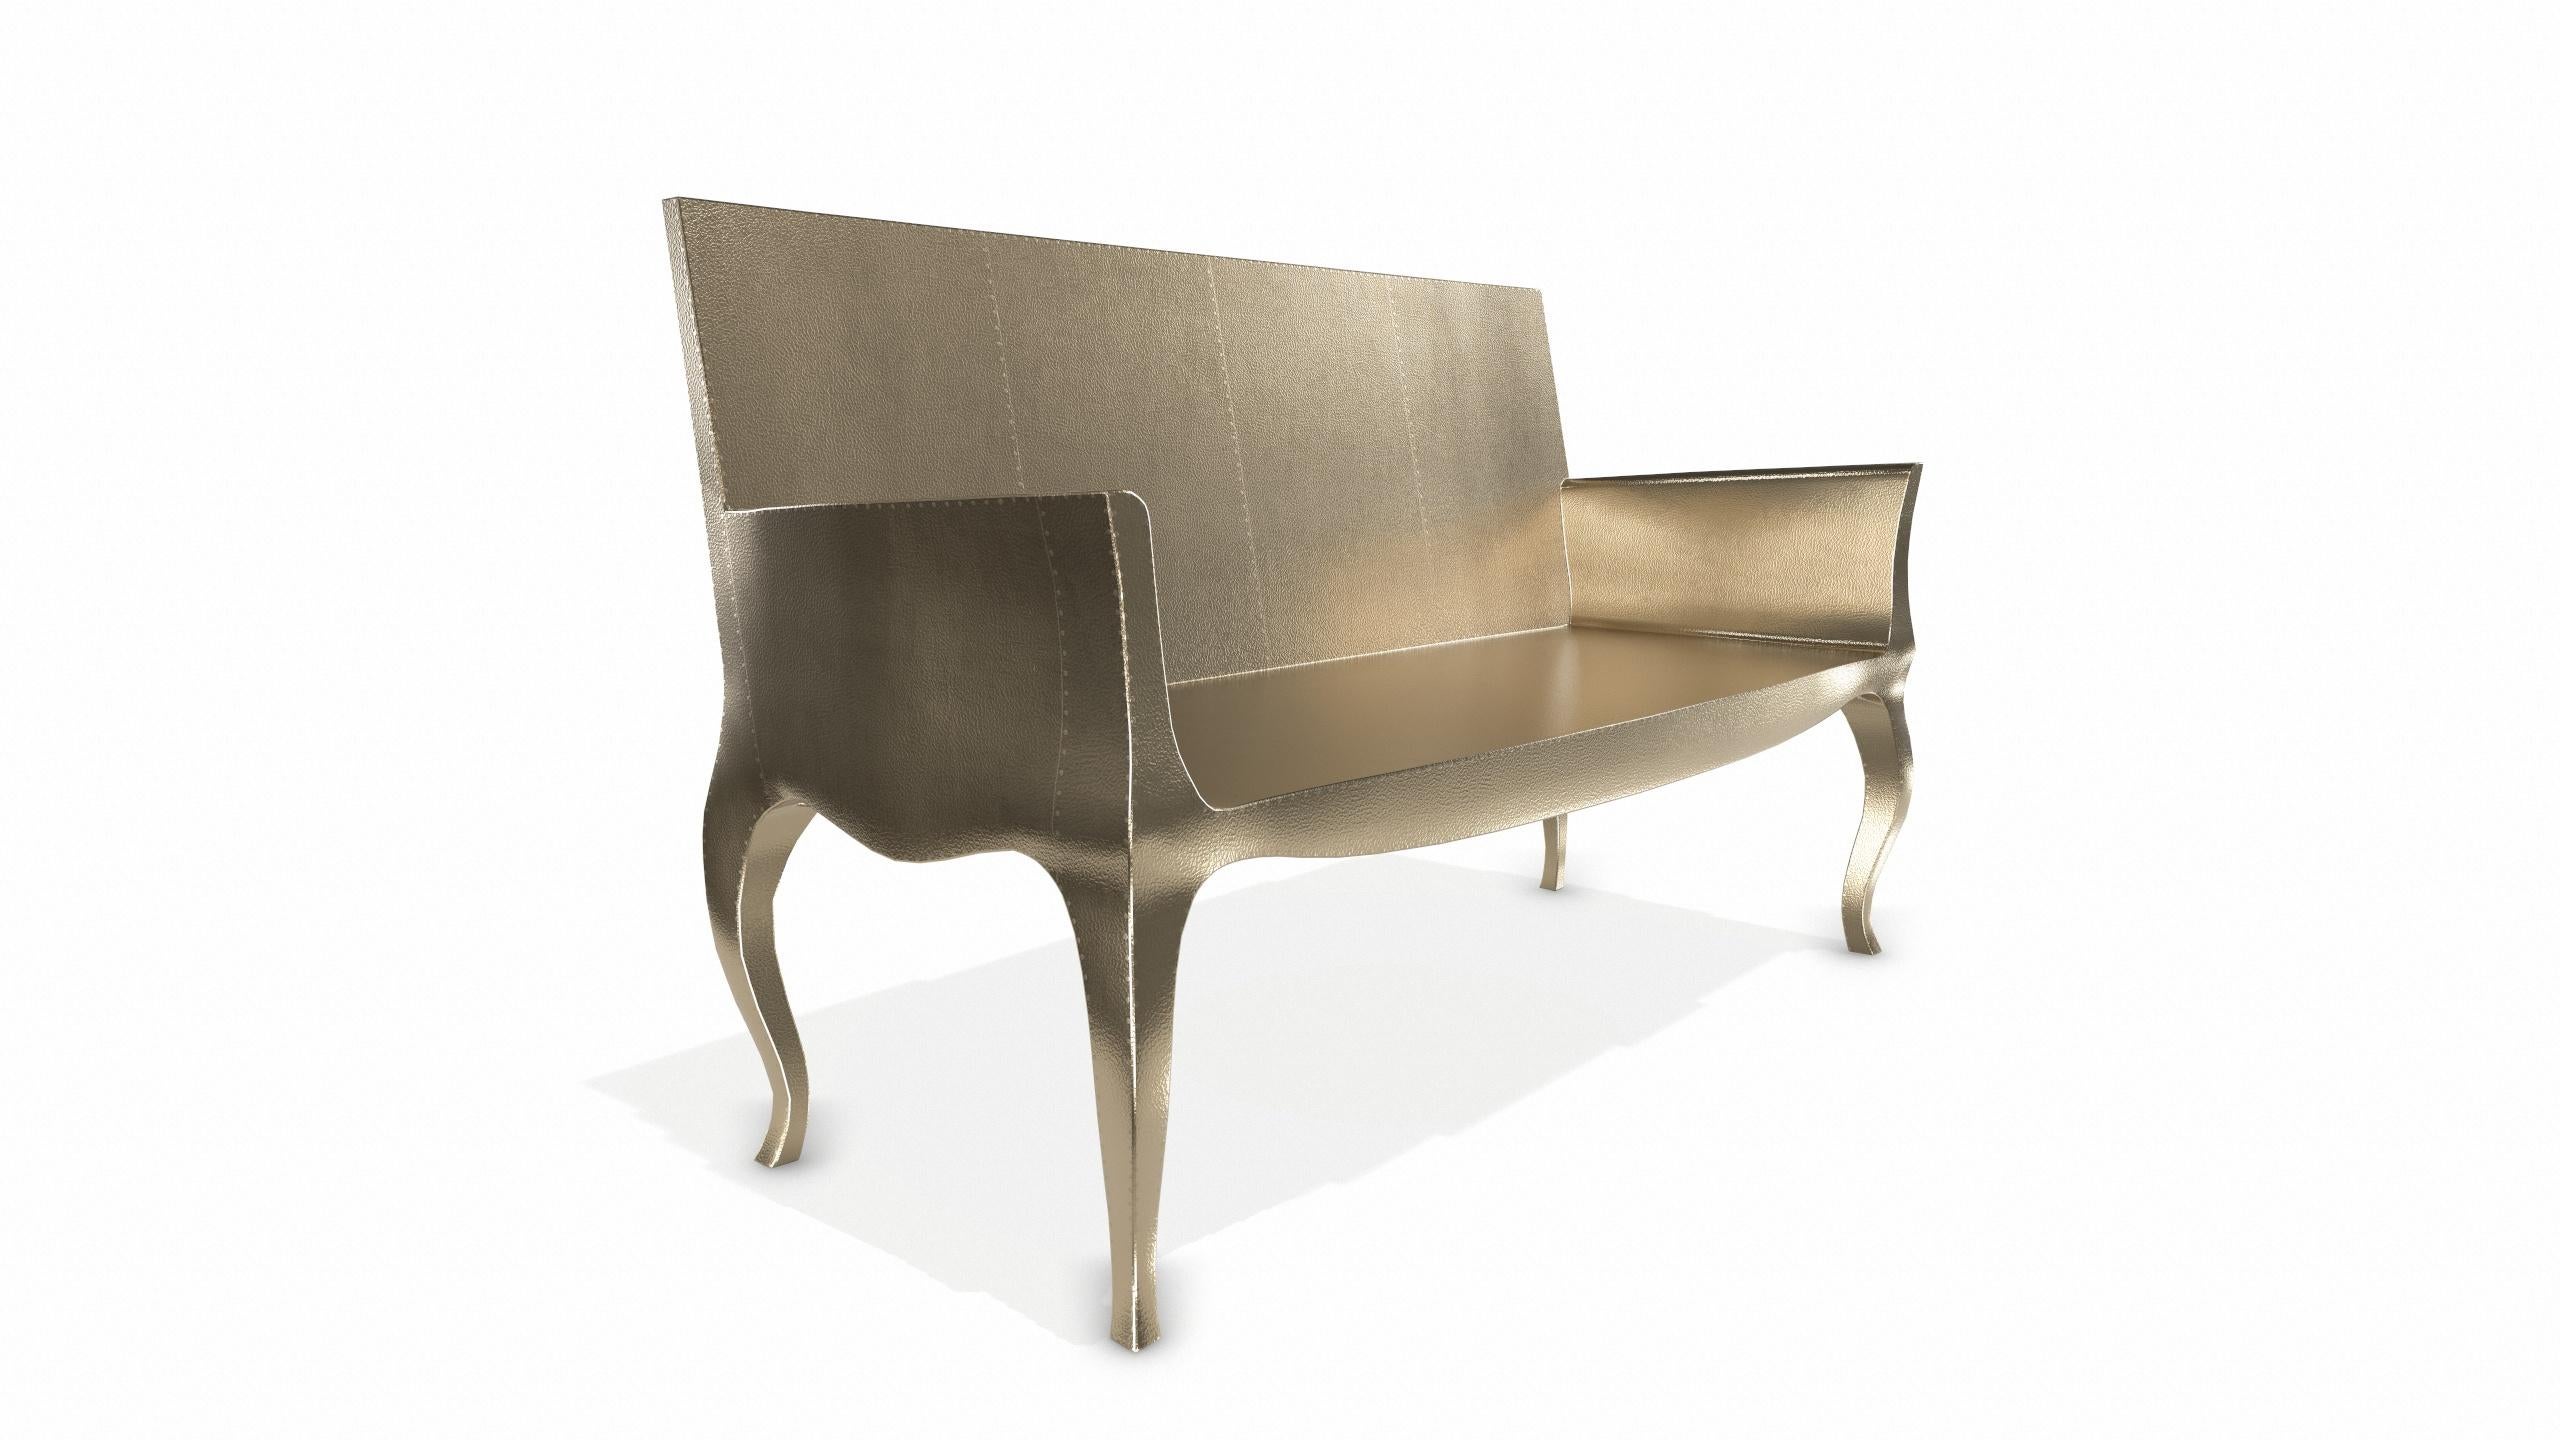 Louise Settee Art Deco Loveseats in Fine Hammered Brass by Paul Mathieu In New Condition For Sale In New York, NY